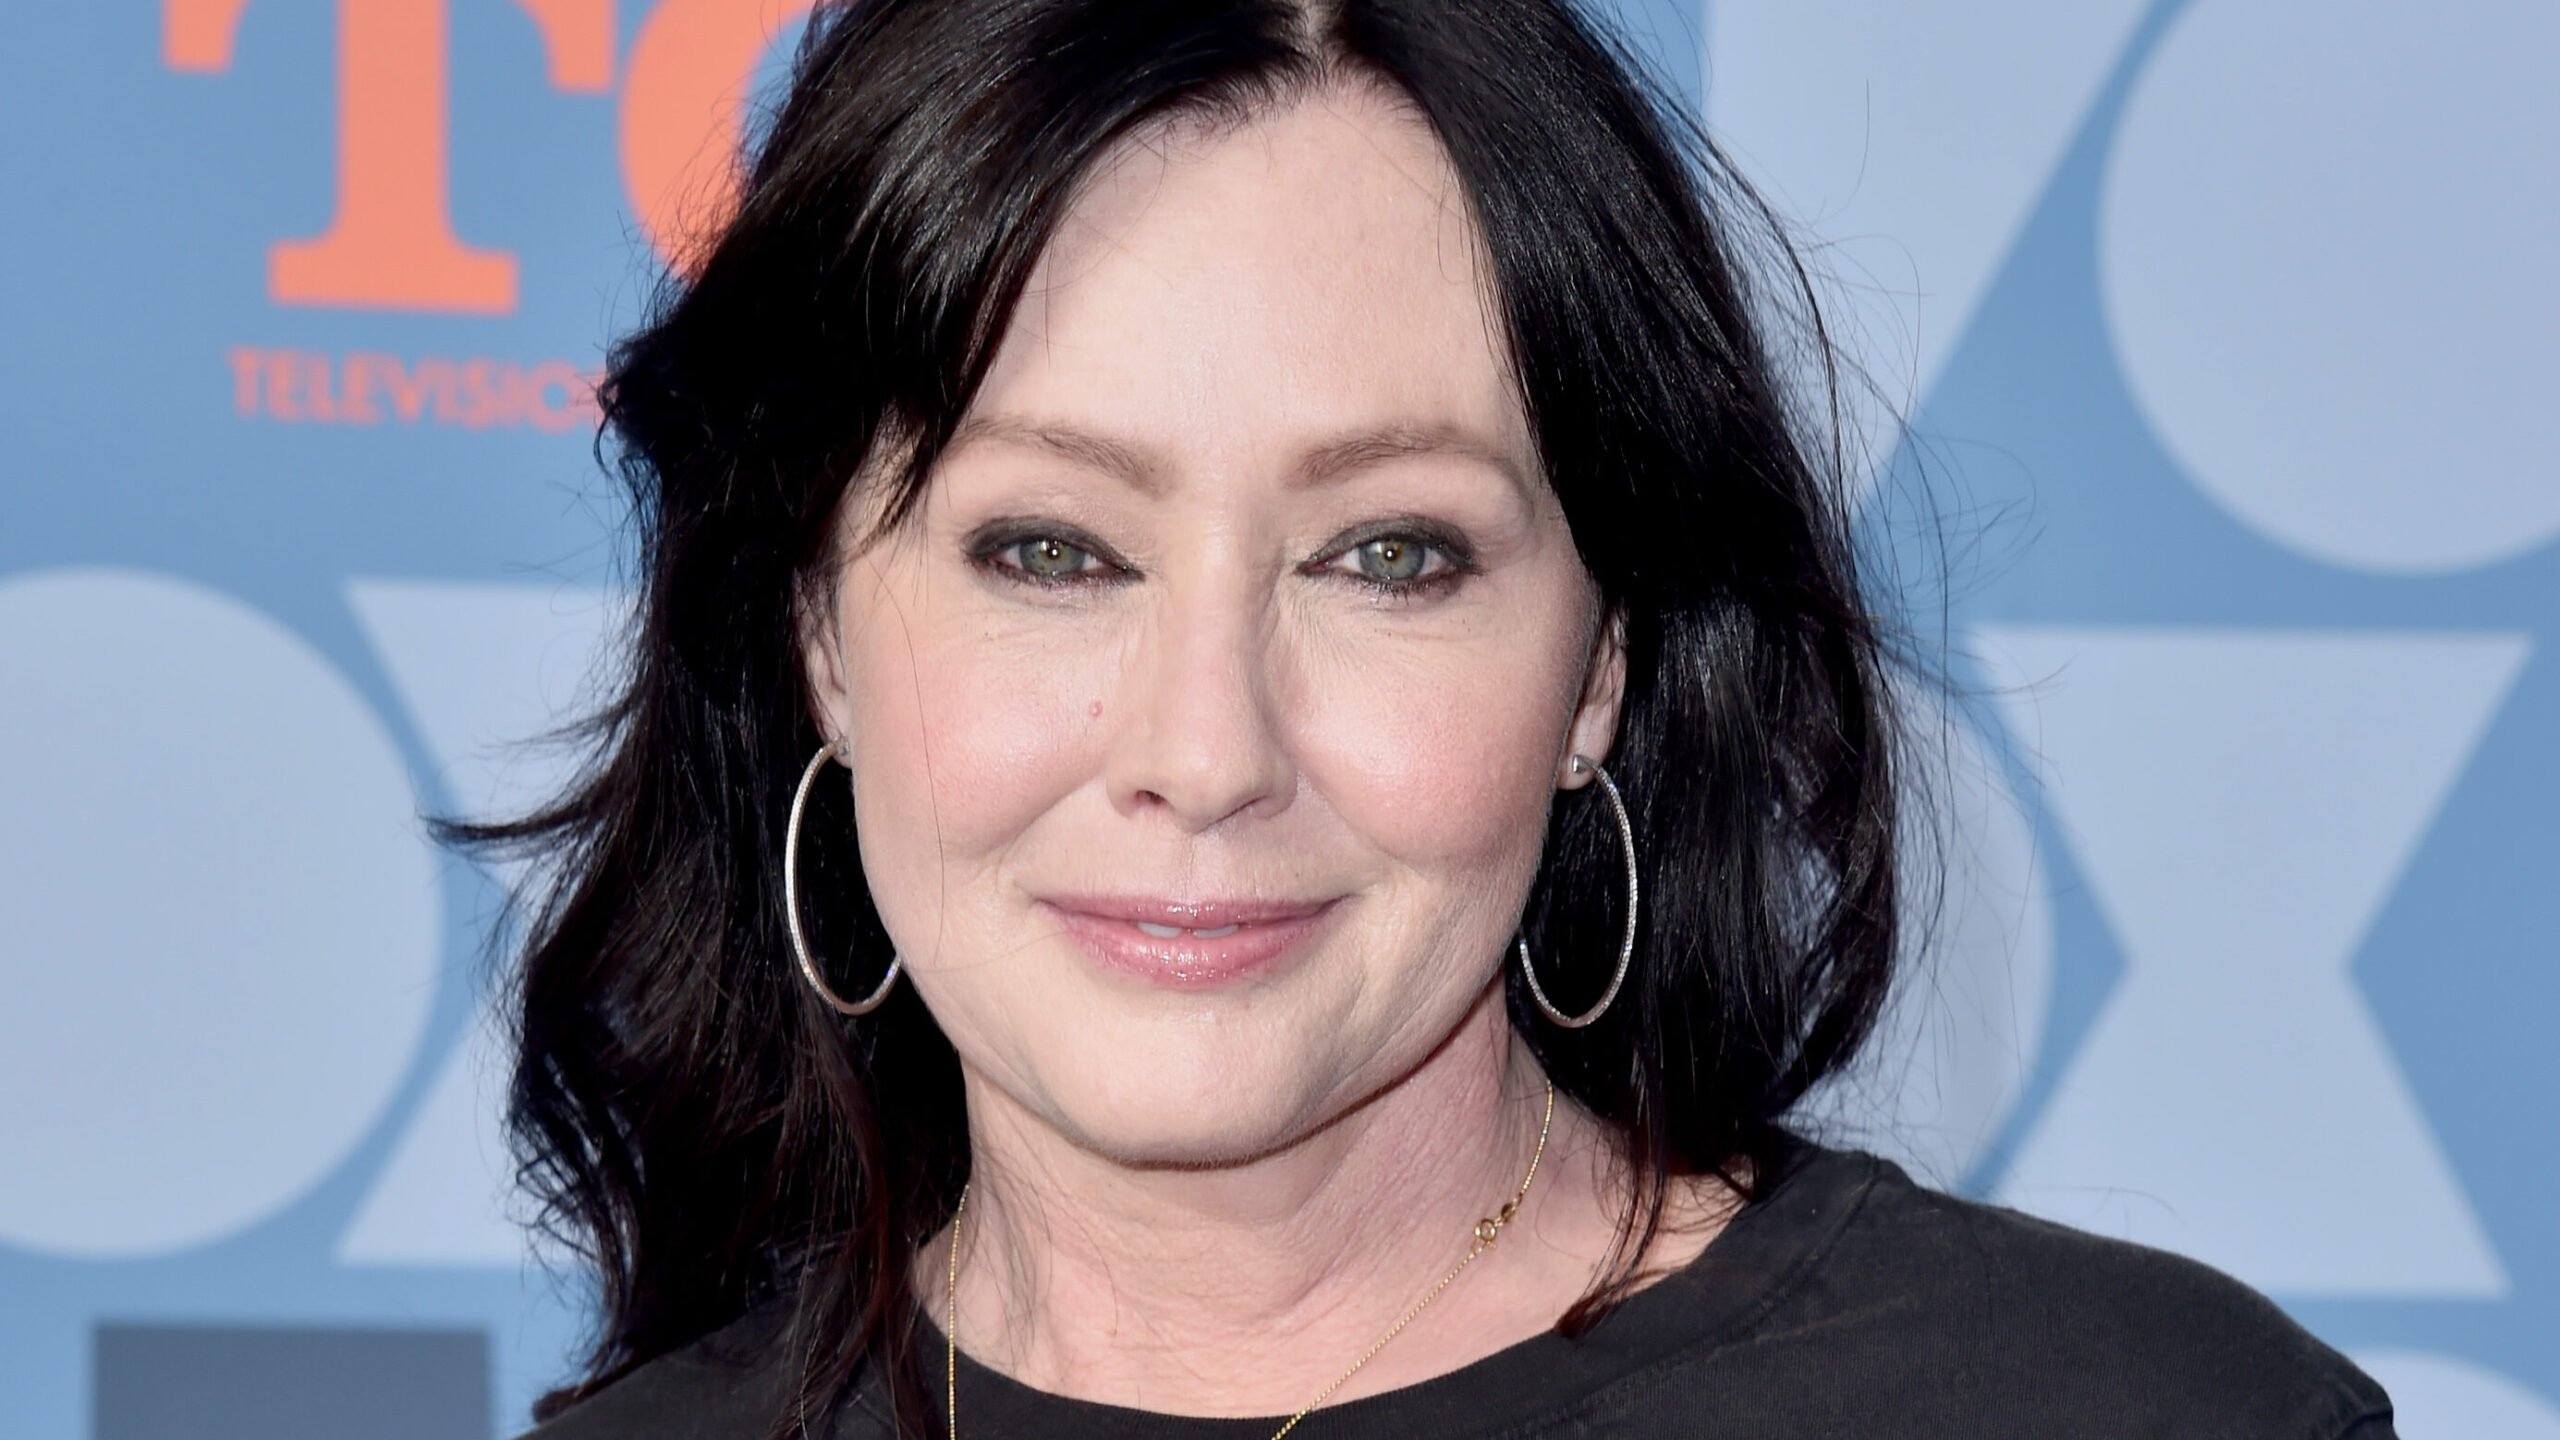 LOS ANGELES, CALIFORNIA - AUGUST 07: Shannen Doherty attends the FOX Summer TCA 2019 All-Star Party at Fox Studios on August 07, 2019 in Los Angeles, California. (Photo by Alberto E. Rodriguez/Getty Images)
